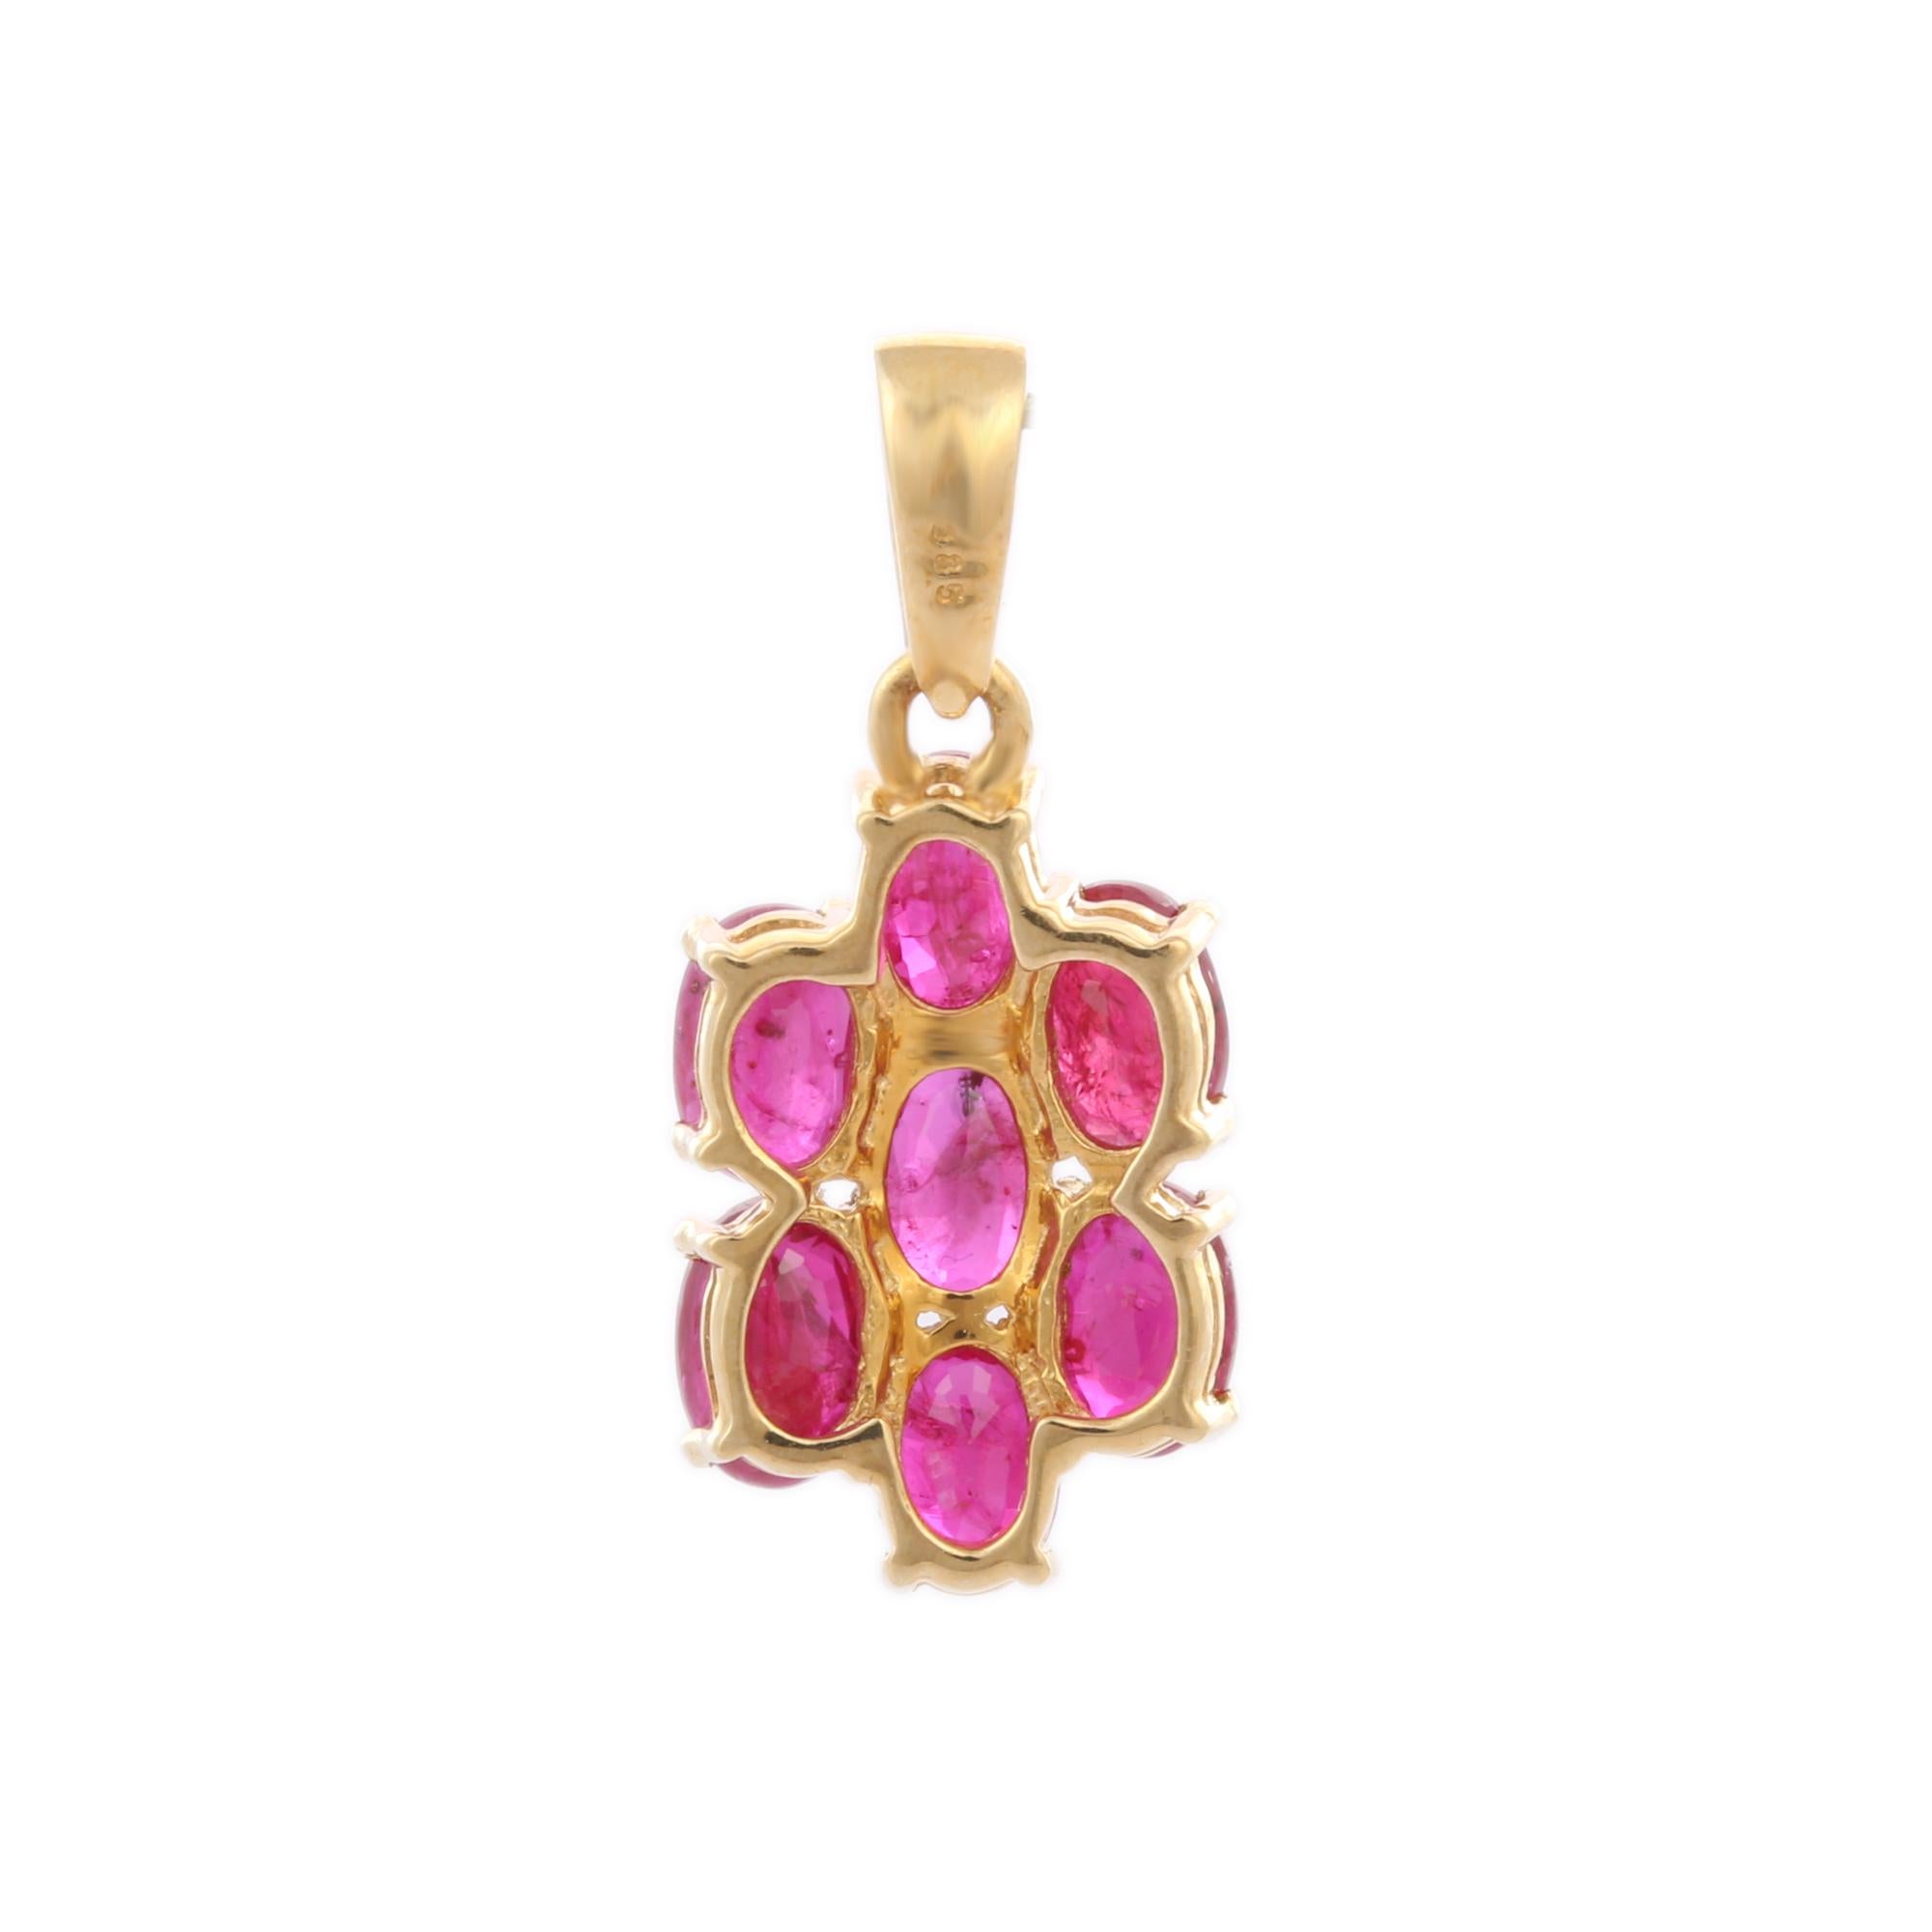 Contemporary 3.02 ct Alluring Oval Cut Ruby Flower Pendant in 14K Yellow Gold, Ruby Pendant For Sale